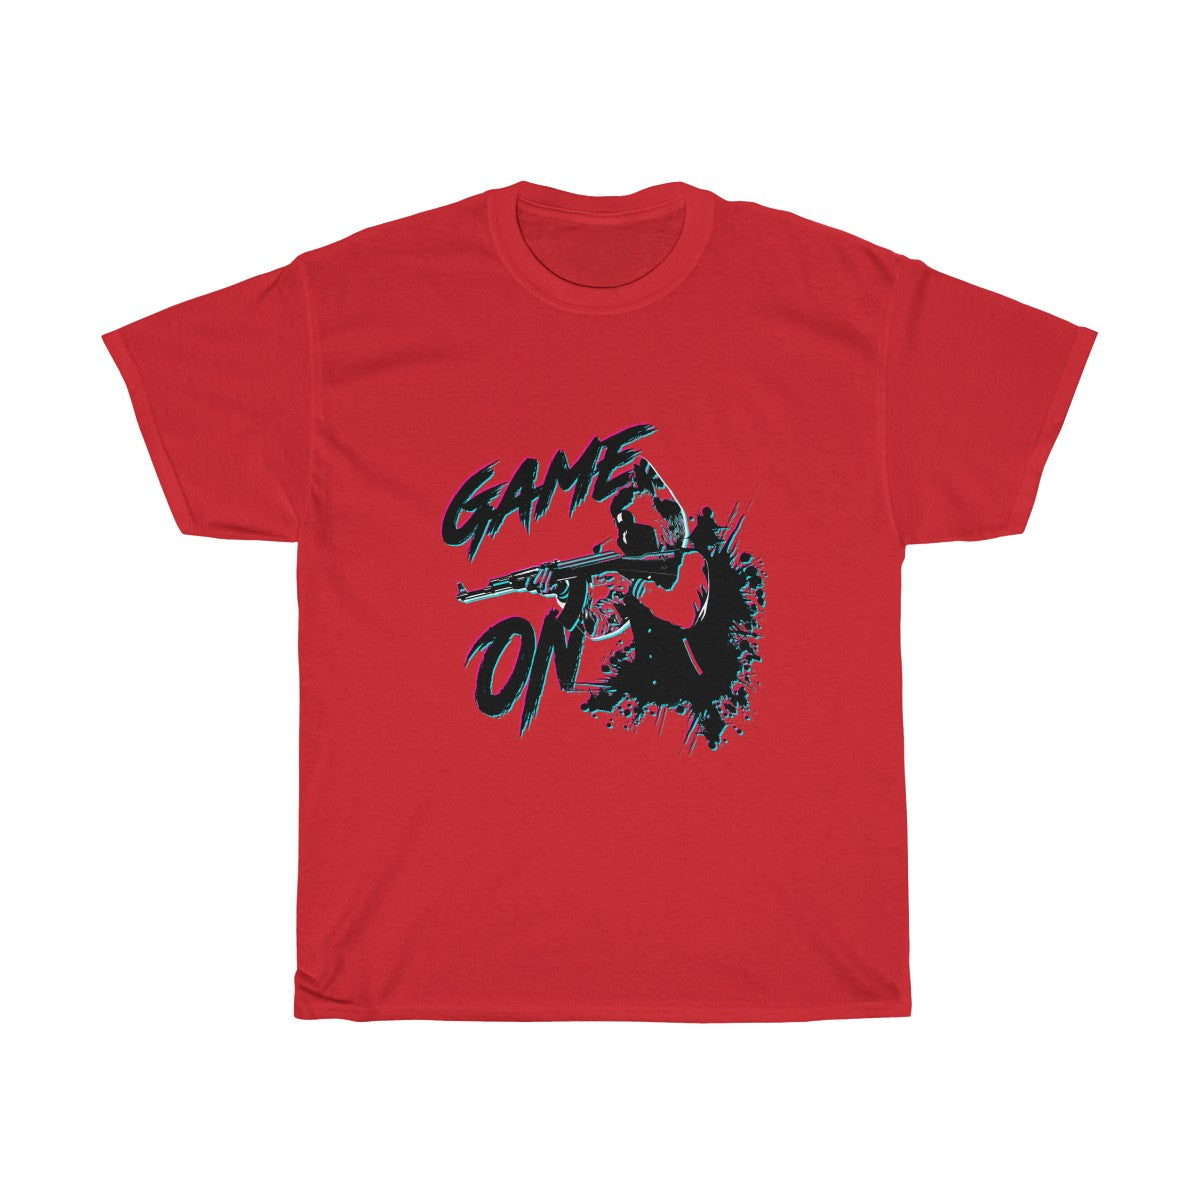 Game On - T-Shirt T-Shirt Corey Coyote Red S 